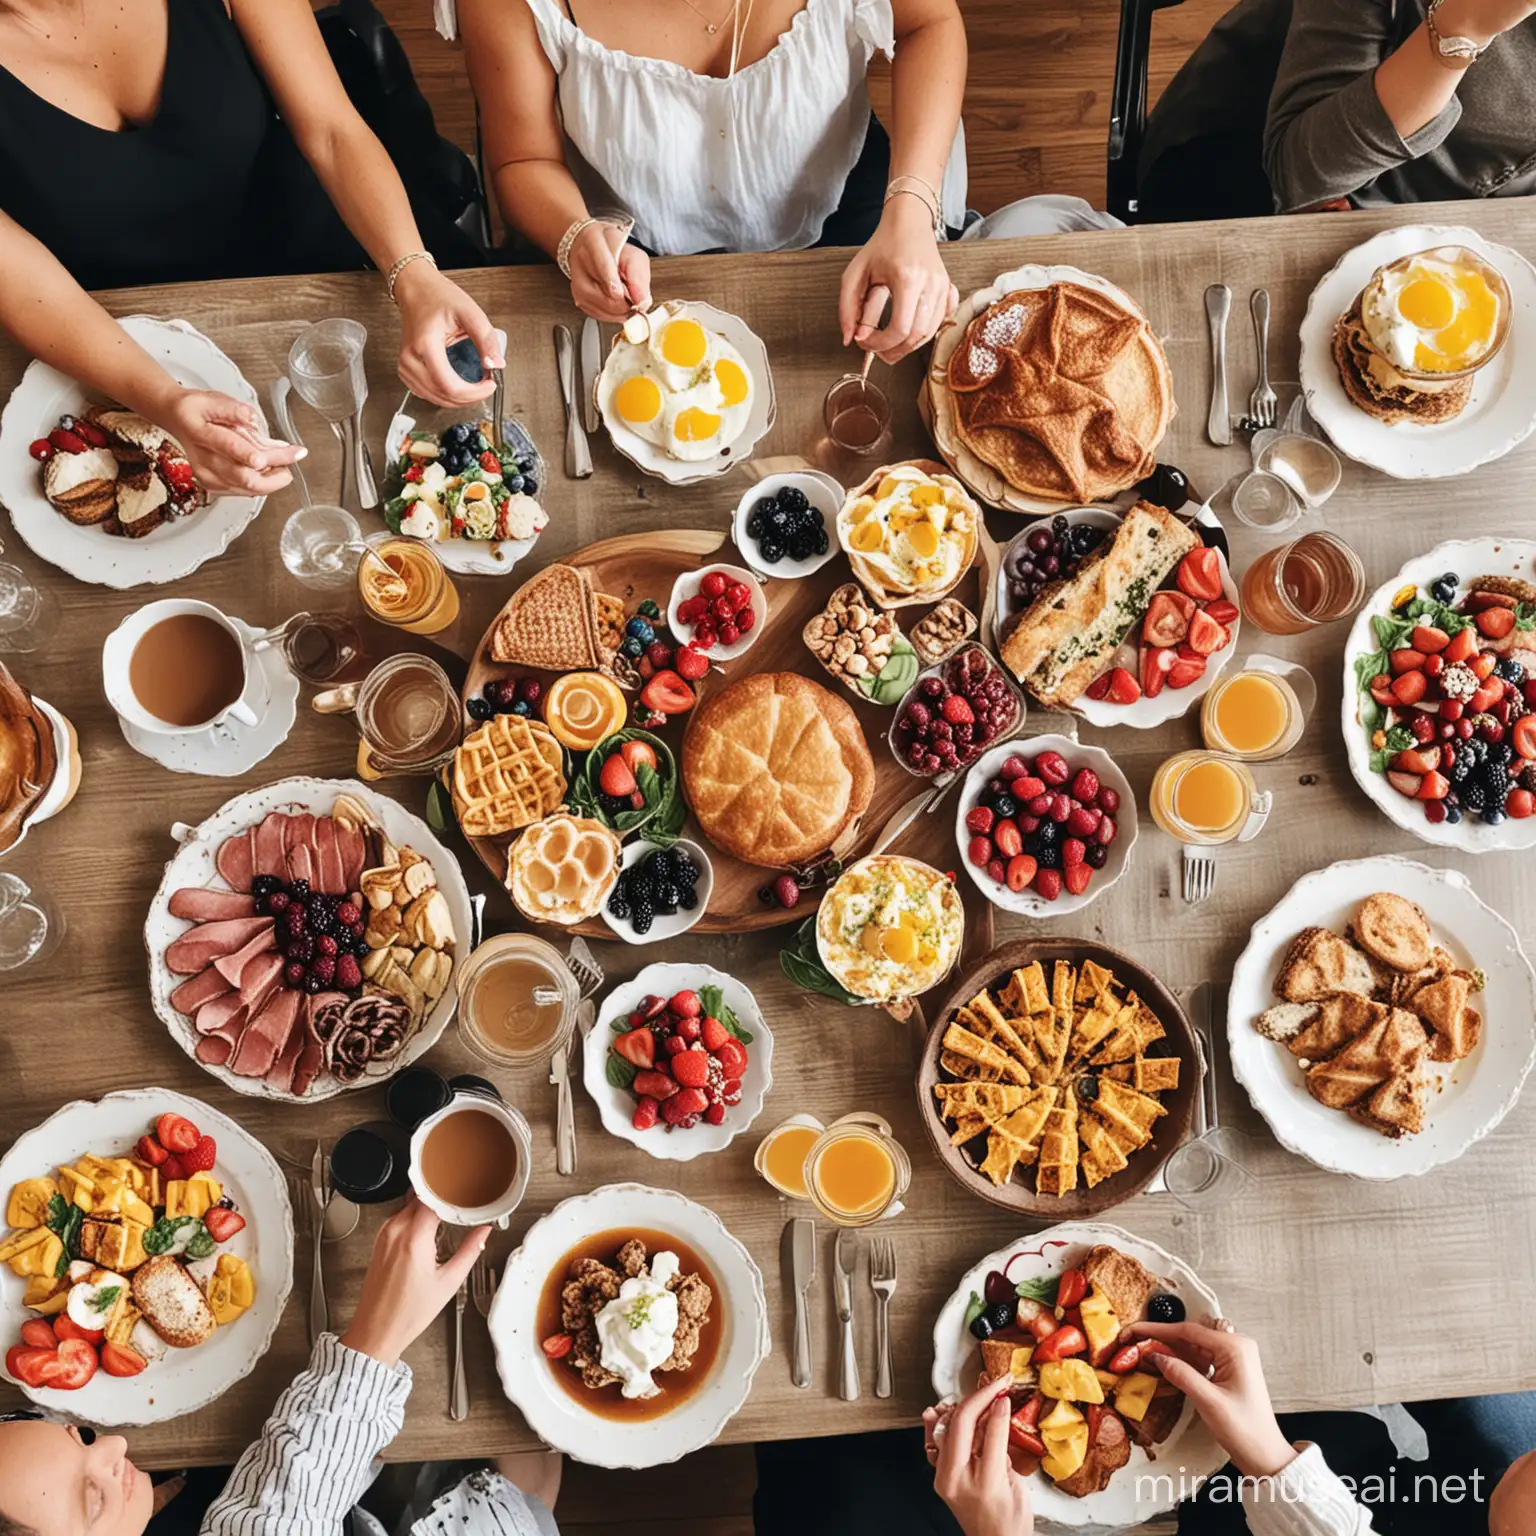 create an instagram post that will be paired with this caption 
"Cheers to Mom with a delicious Mother's Day brunch spread! 💐 Show her some love by taking her to one of these local restaurants! Tag your favorite brunch spot! #MothersDayBrunch"